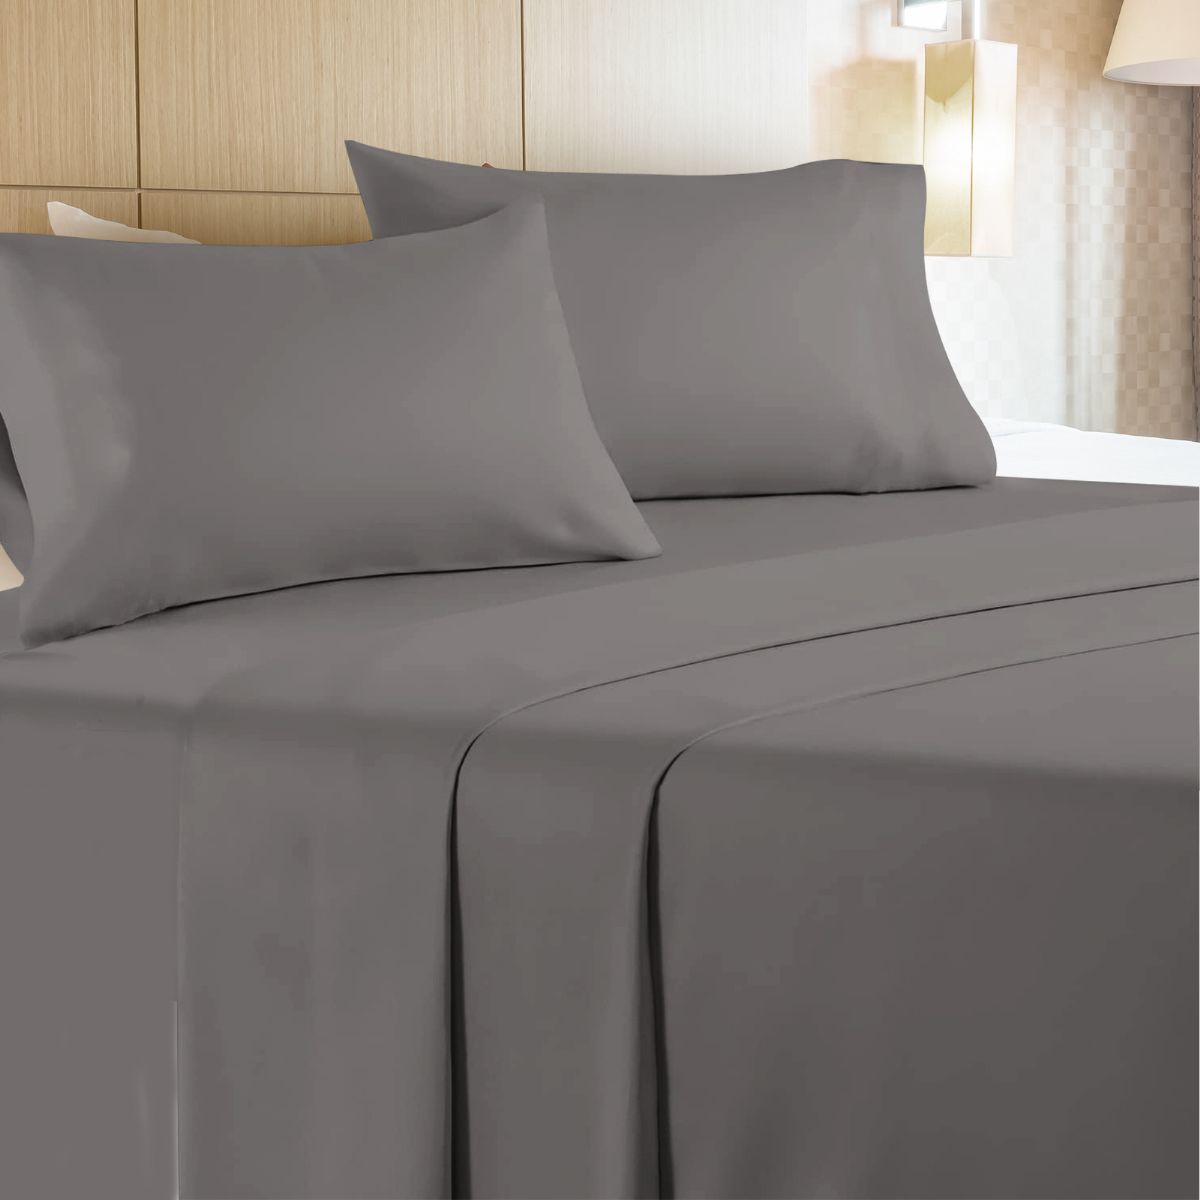 6 Wholesale 4 Piece Microfiber Bed Sheet Set Queen Size In Charcoal